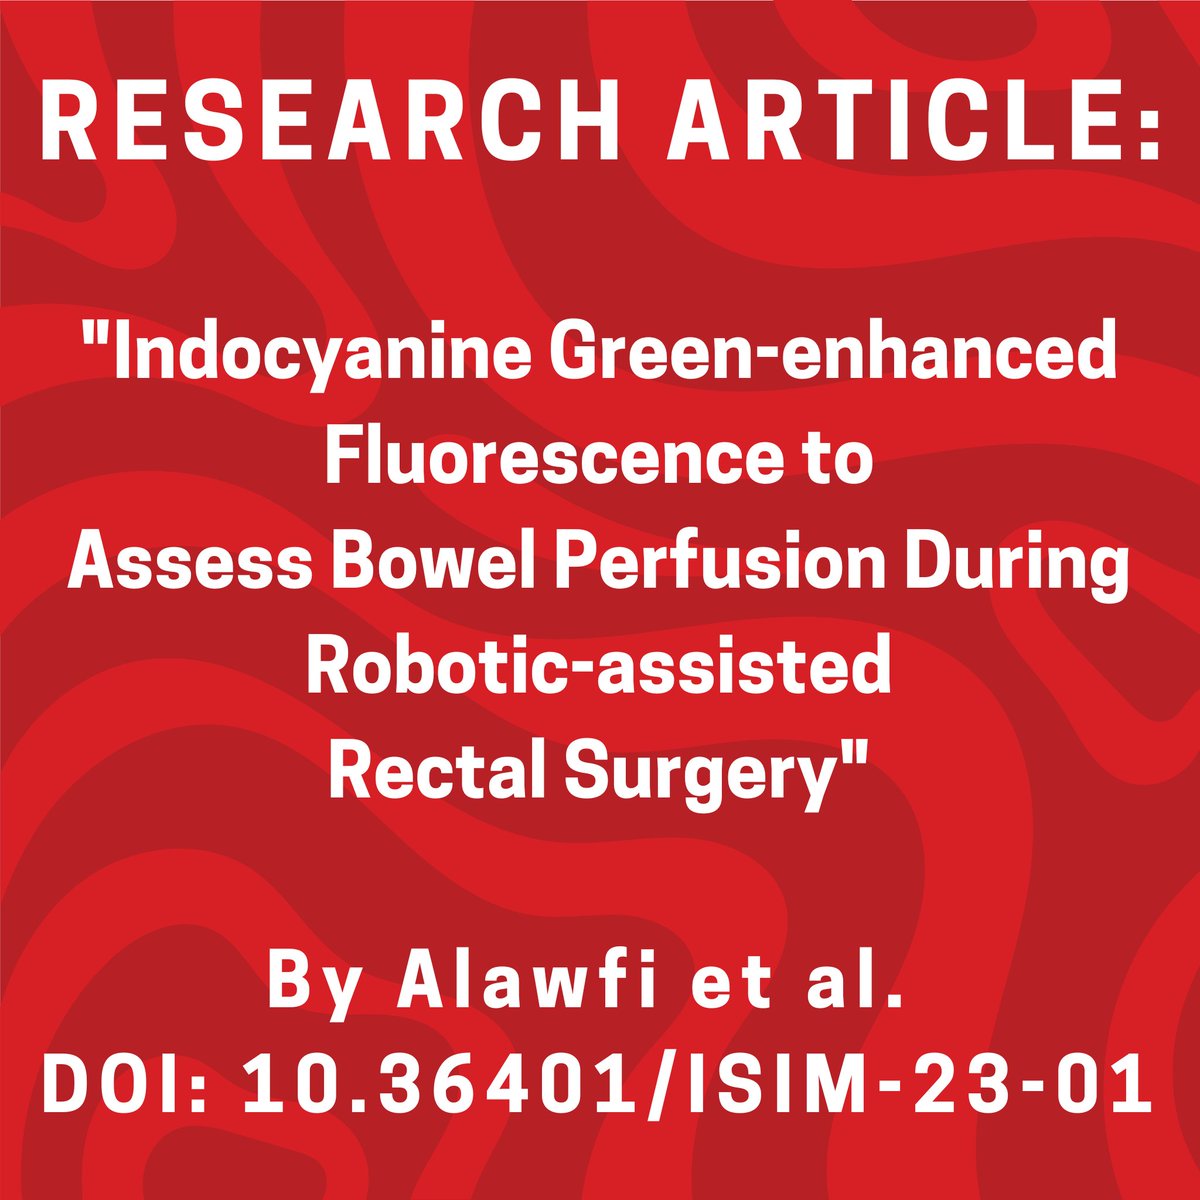 New in #ISIMJournal : 'Indocyanine Green-enhanced Fluorescence to Assess Bowel Perfusion During Robotic-assisted Rectal Surgery' by Alawfi et al. 
doi.org/10.36401/ISIM-…
#indocyaninegreen #anastomoticleak
@khaledalkattan  @AzzamKhankan